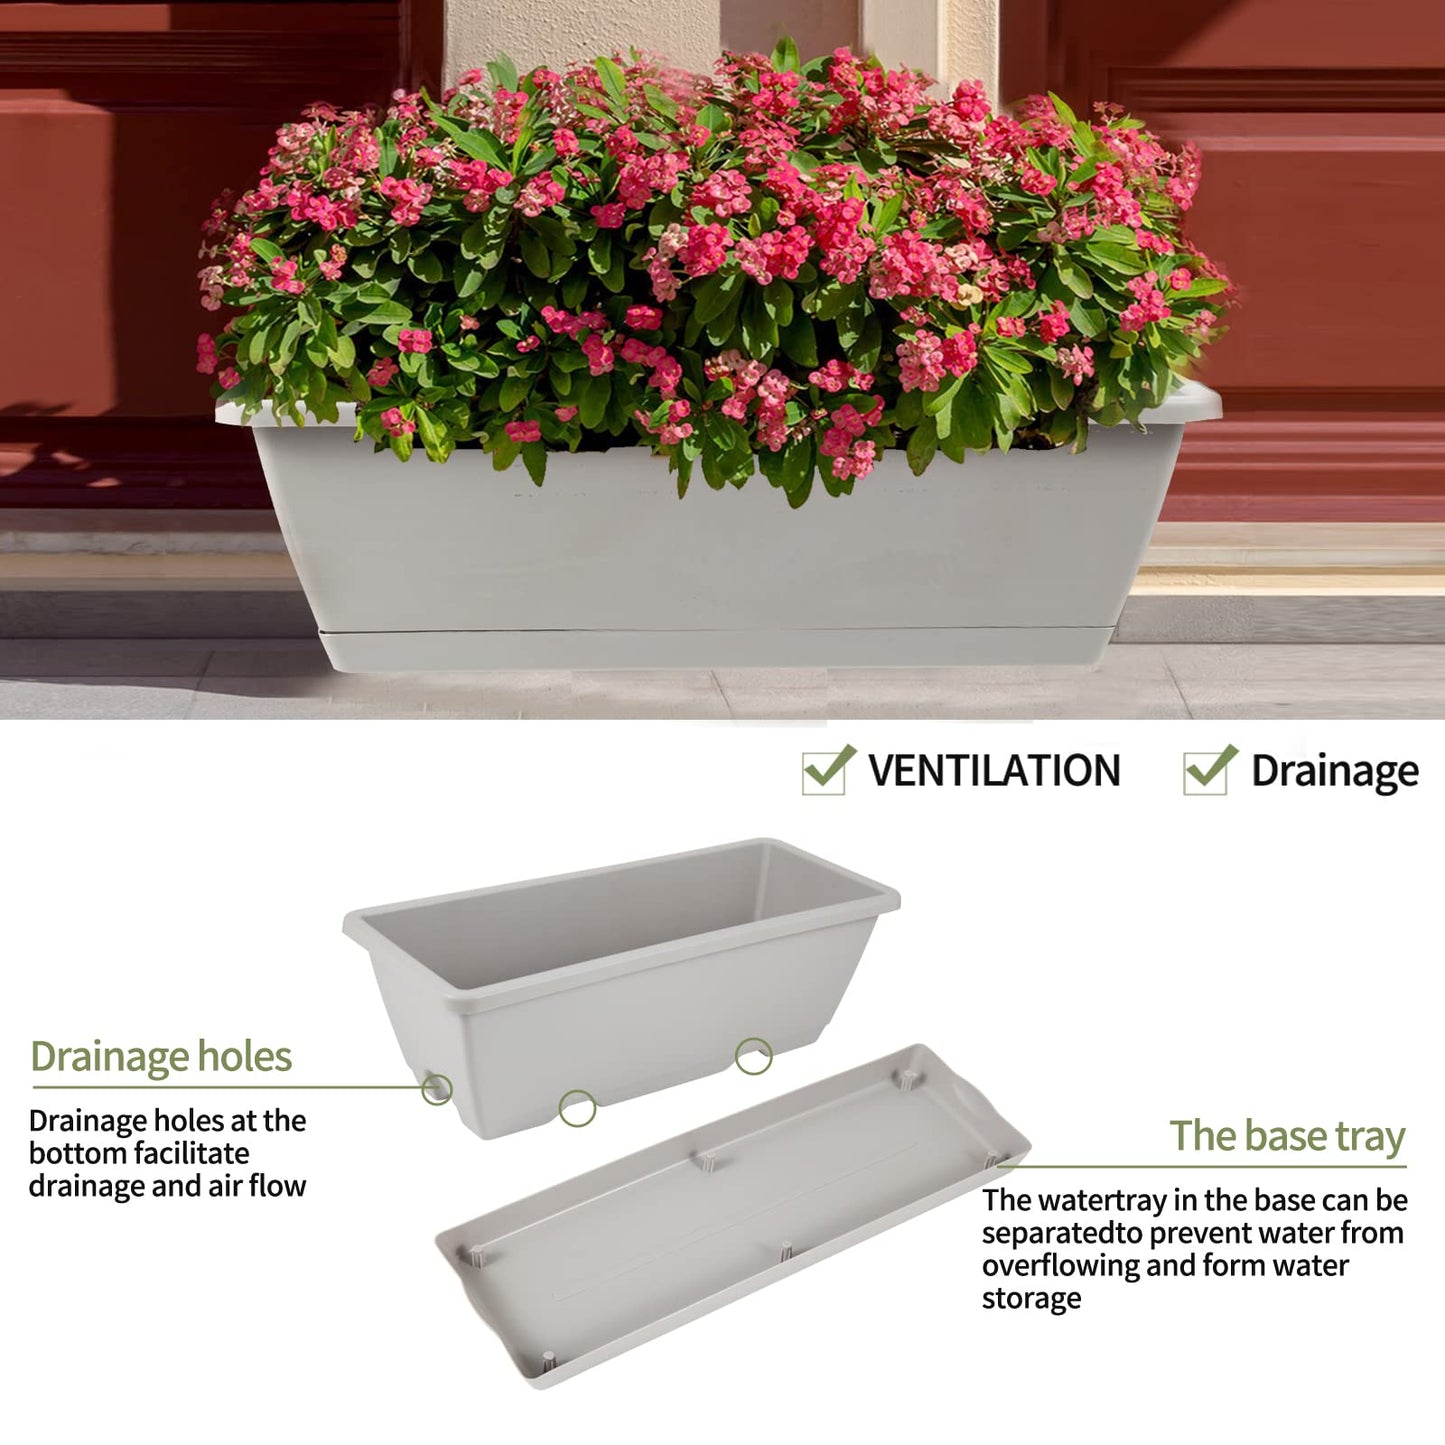 8pcs Window Box Planter, 17 Inches Flower Window Boxes, Rectangle Planters Box with Drainage Holes and Trays, Plastic Vegetable Planters for Windowsill Patio Garden Home Decor Porch Yard (Grey)